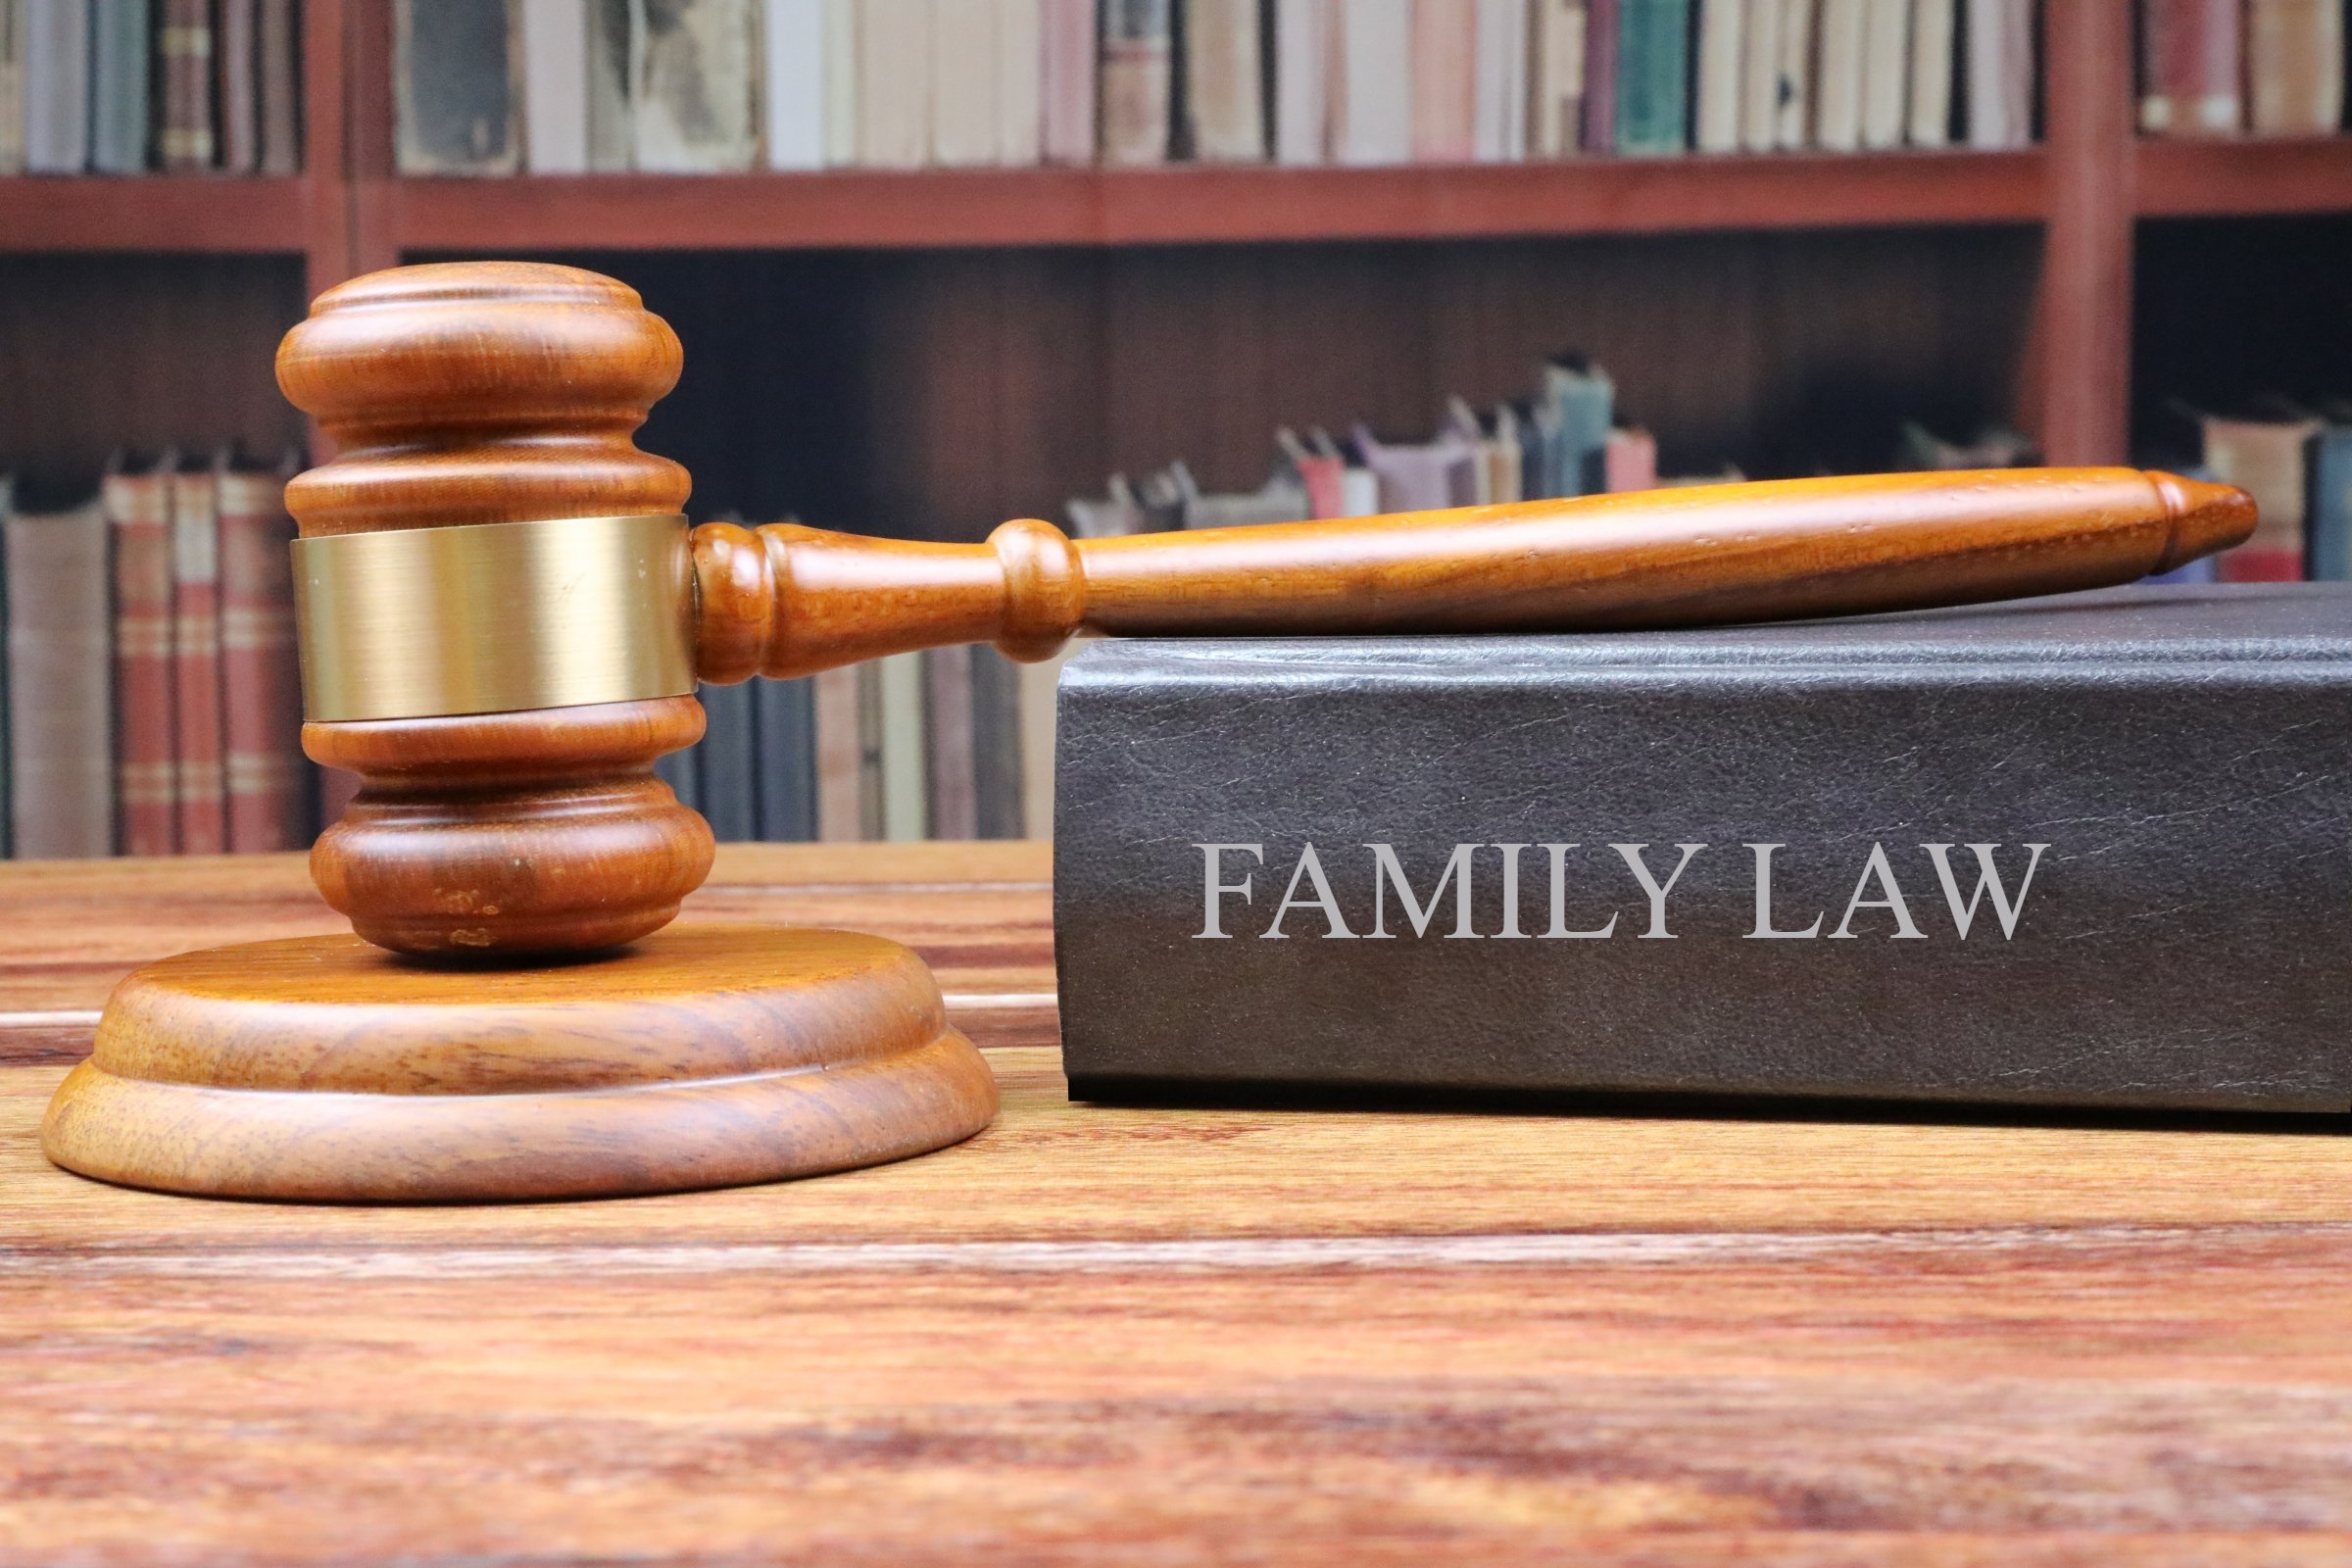 Pilot scheme allows media to report on family law proceedings